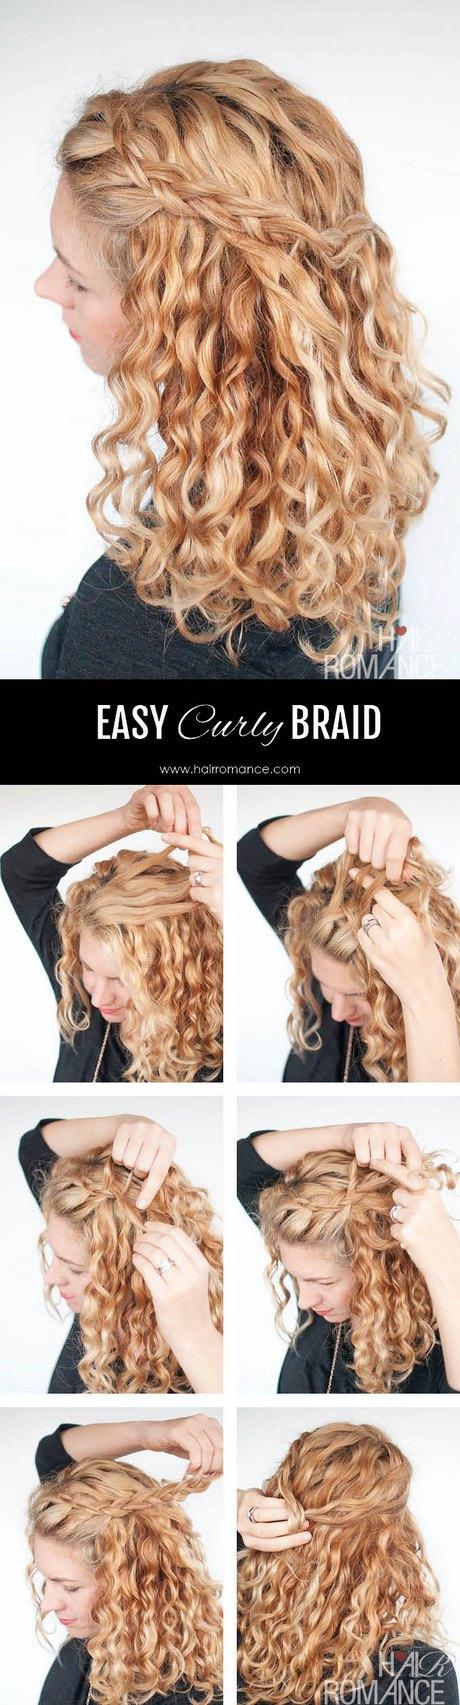 Easy half up half down hairstyles for curly hair easy-half-up-half-down-hairstyles-for-curly-hair-05_5